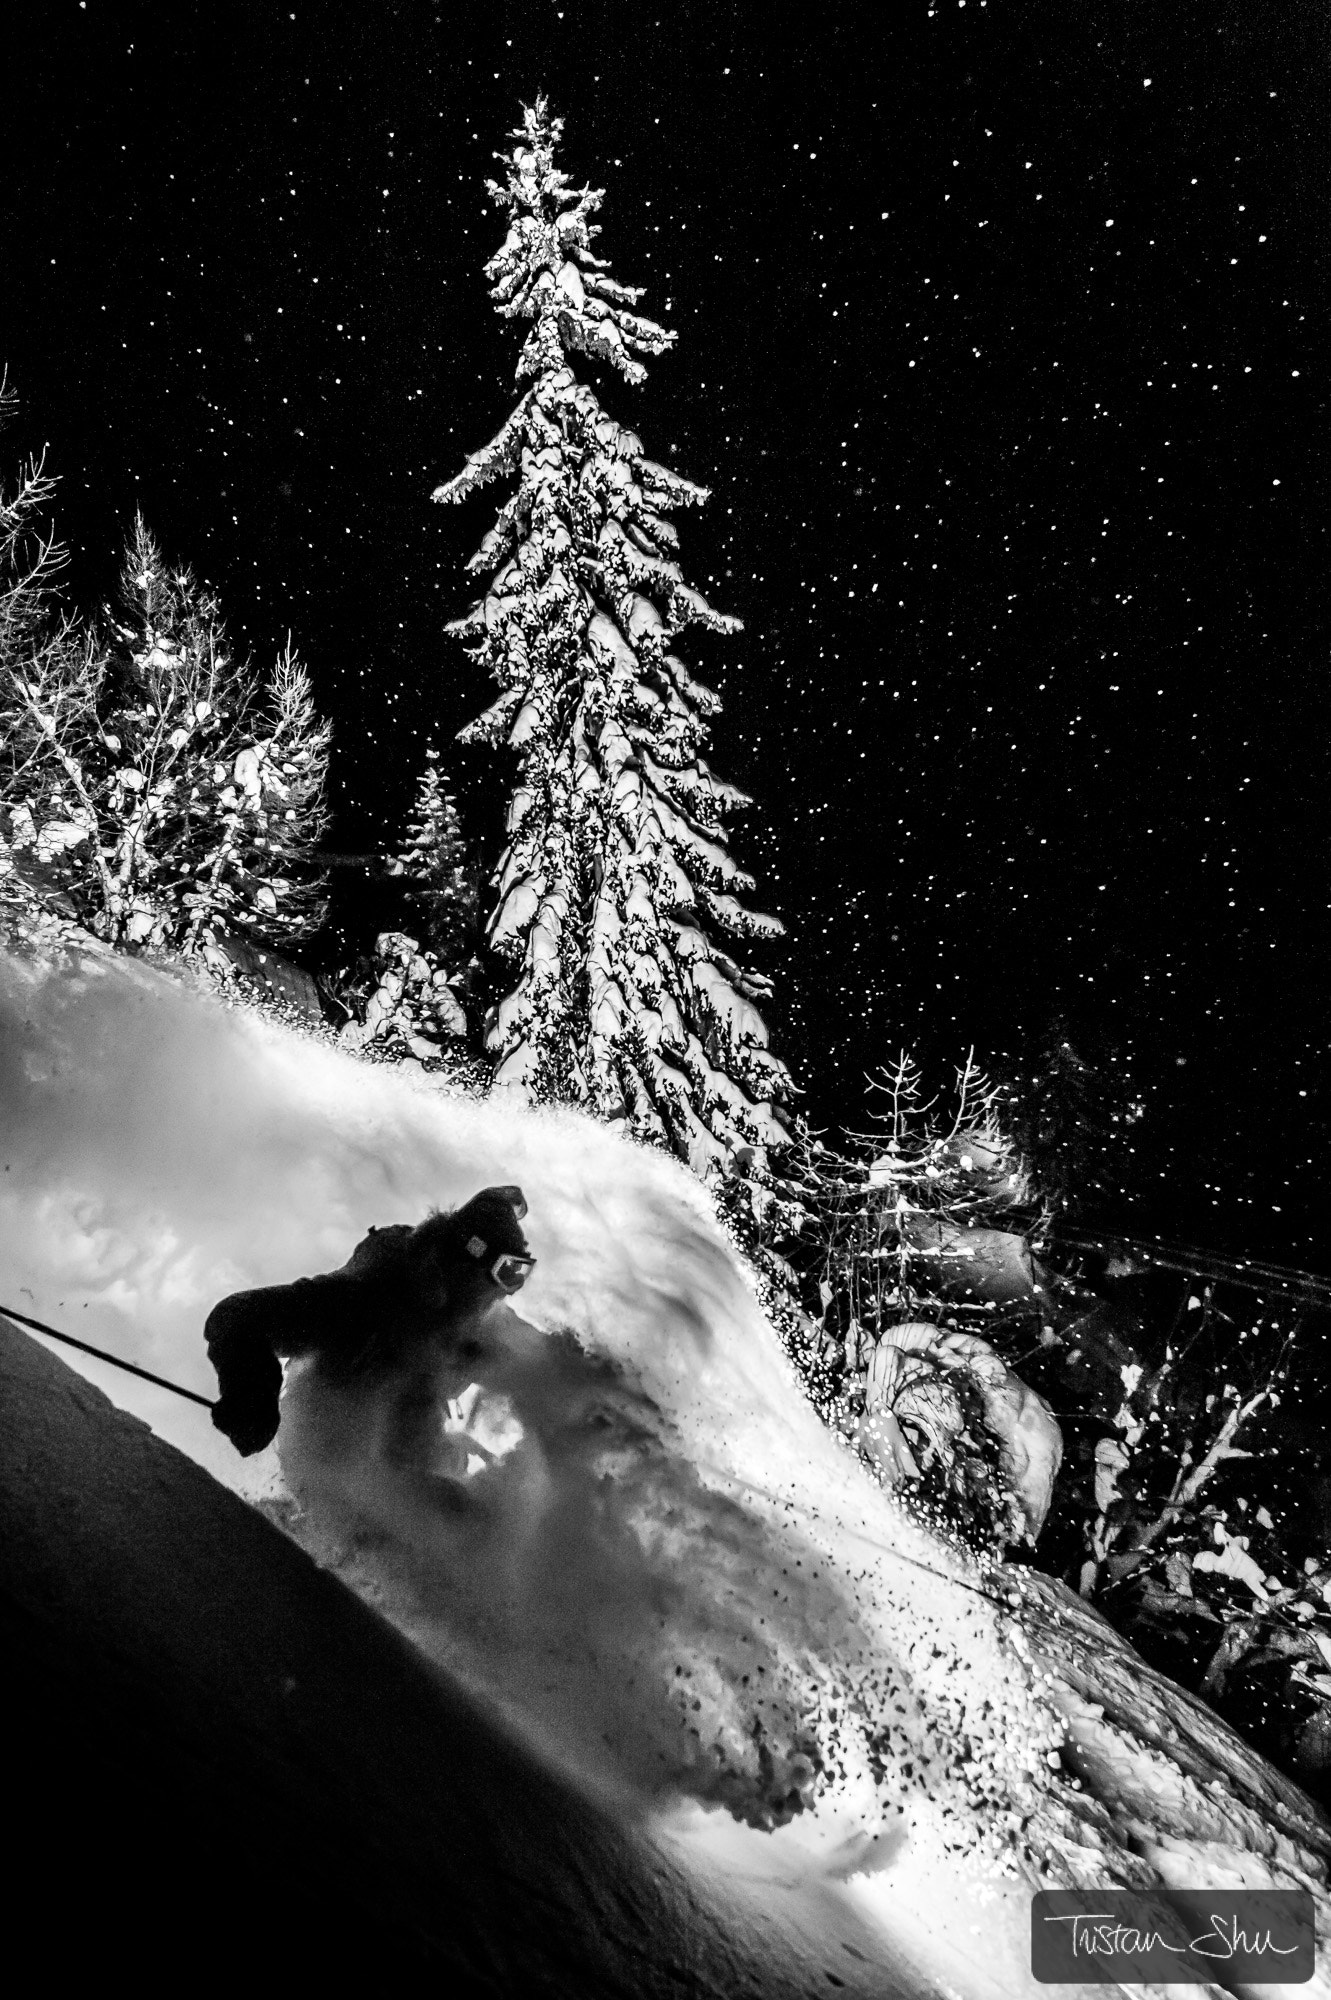 Nikon D4 + Nikon AF-S Nikkor 16-35mm F4G ED VR sample photo. Night powder skiing with adrien coirier photography